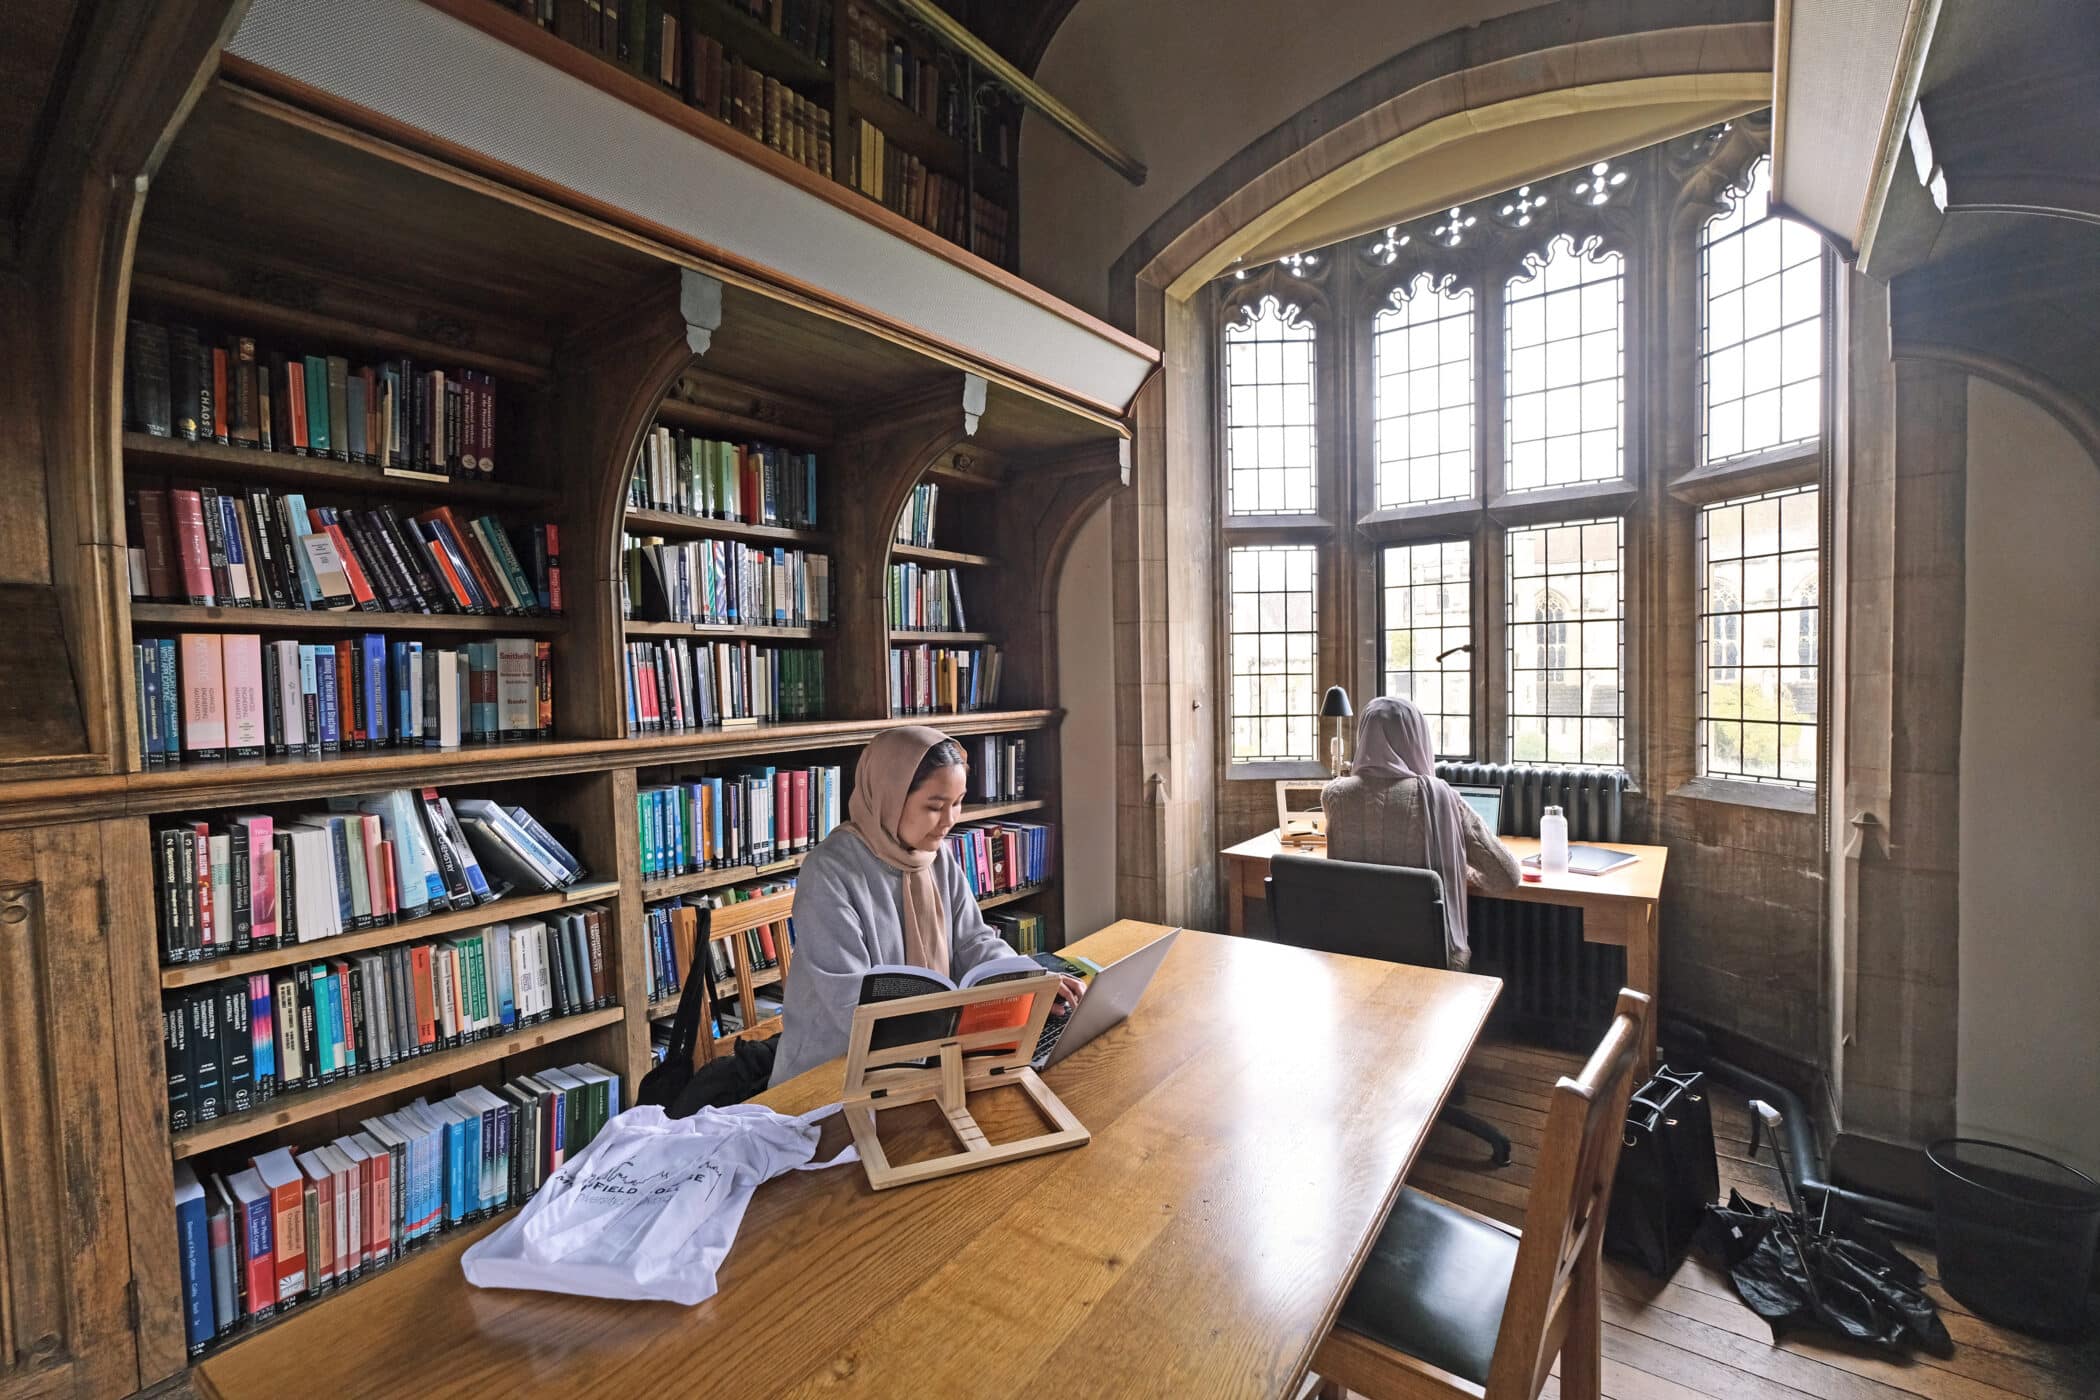 students studying in the library